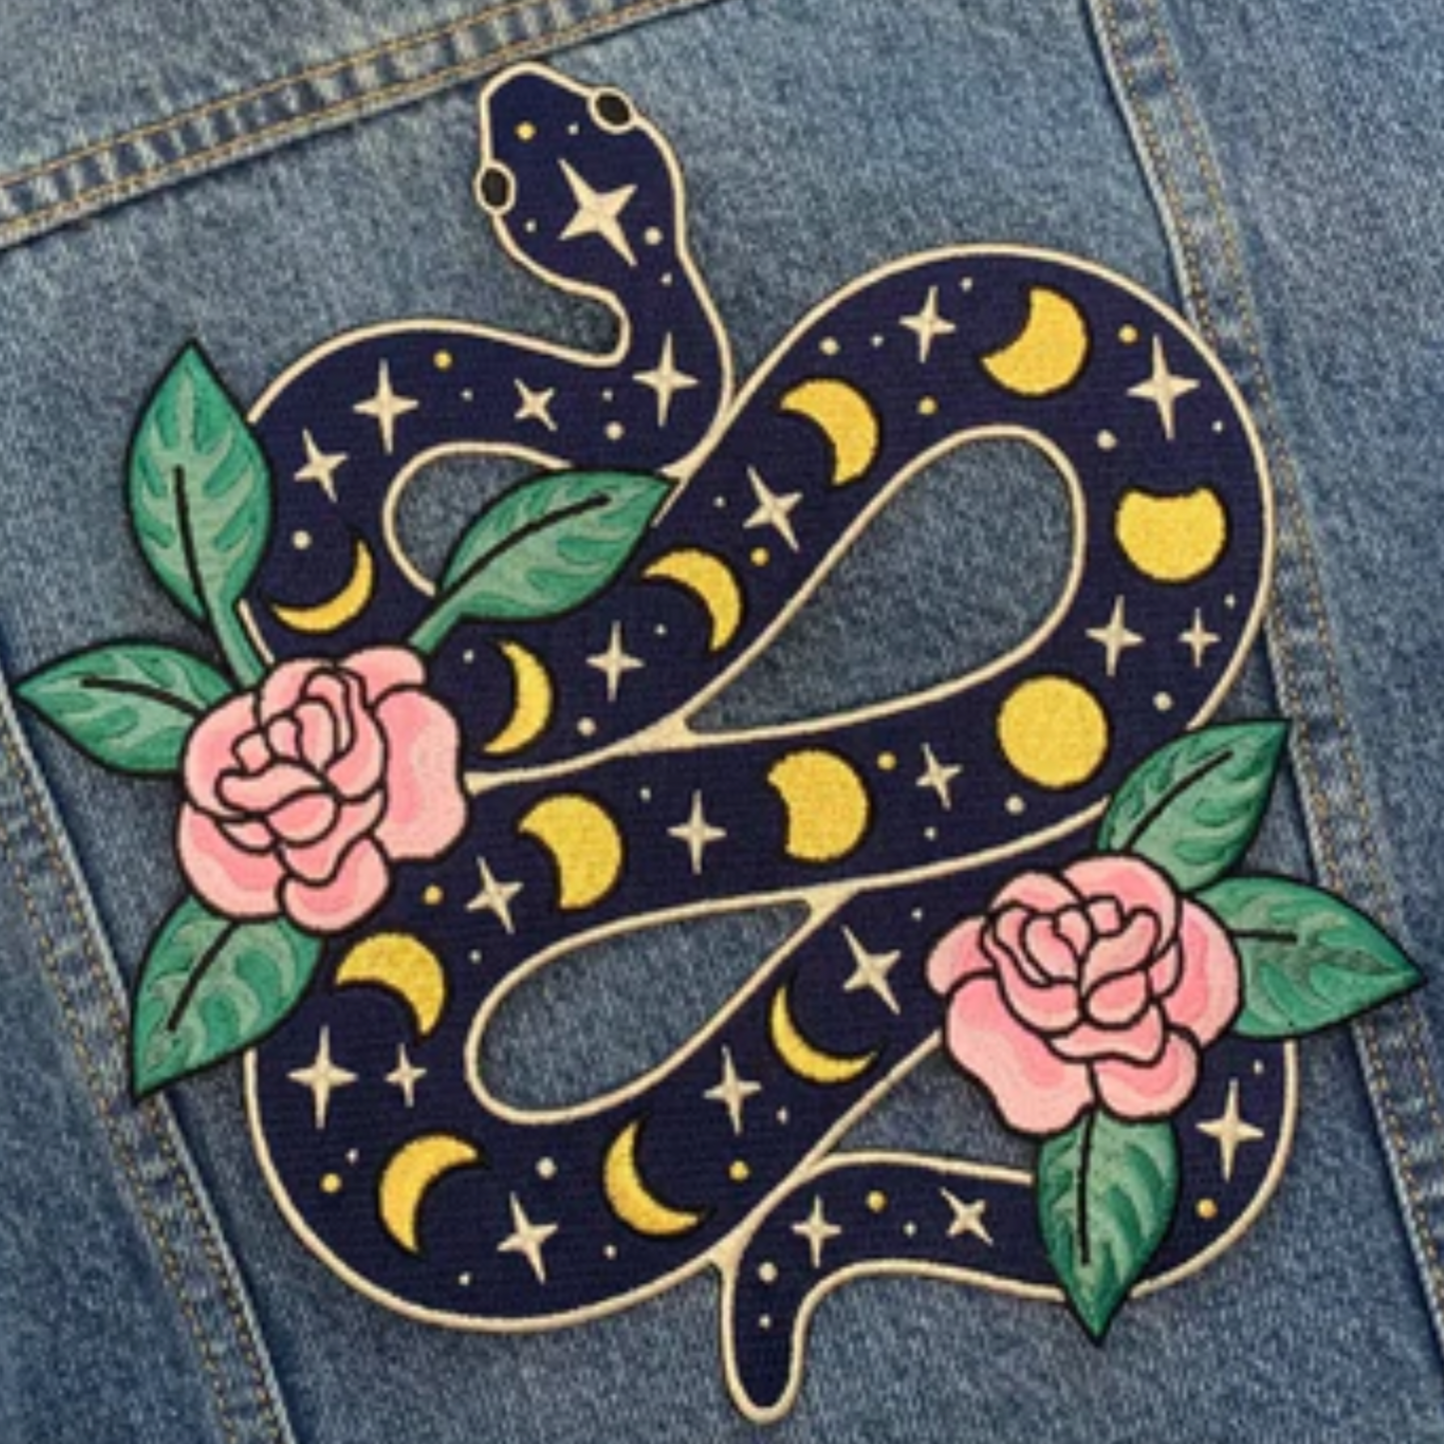 Snake w/ Moon Phases XL Back Patch